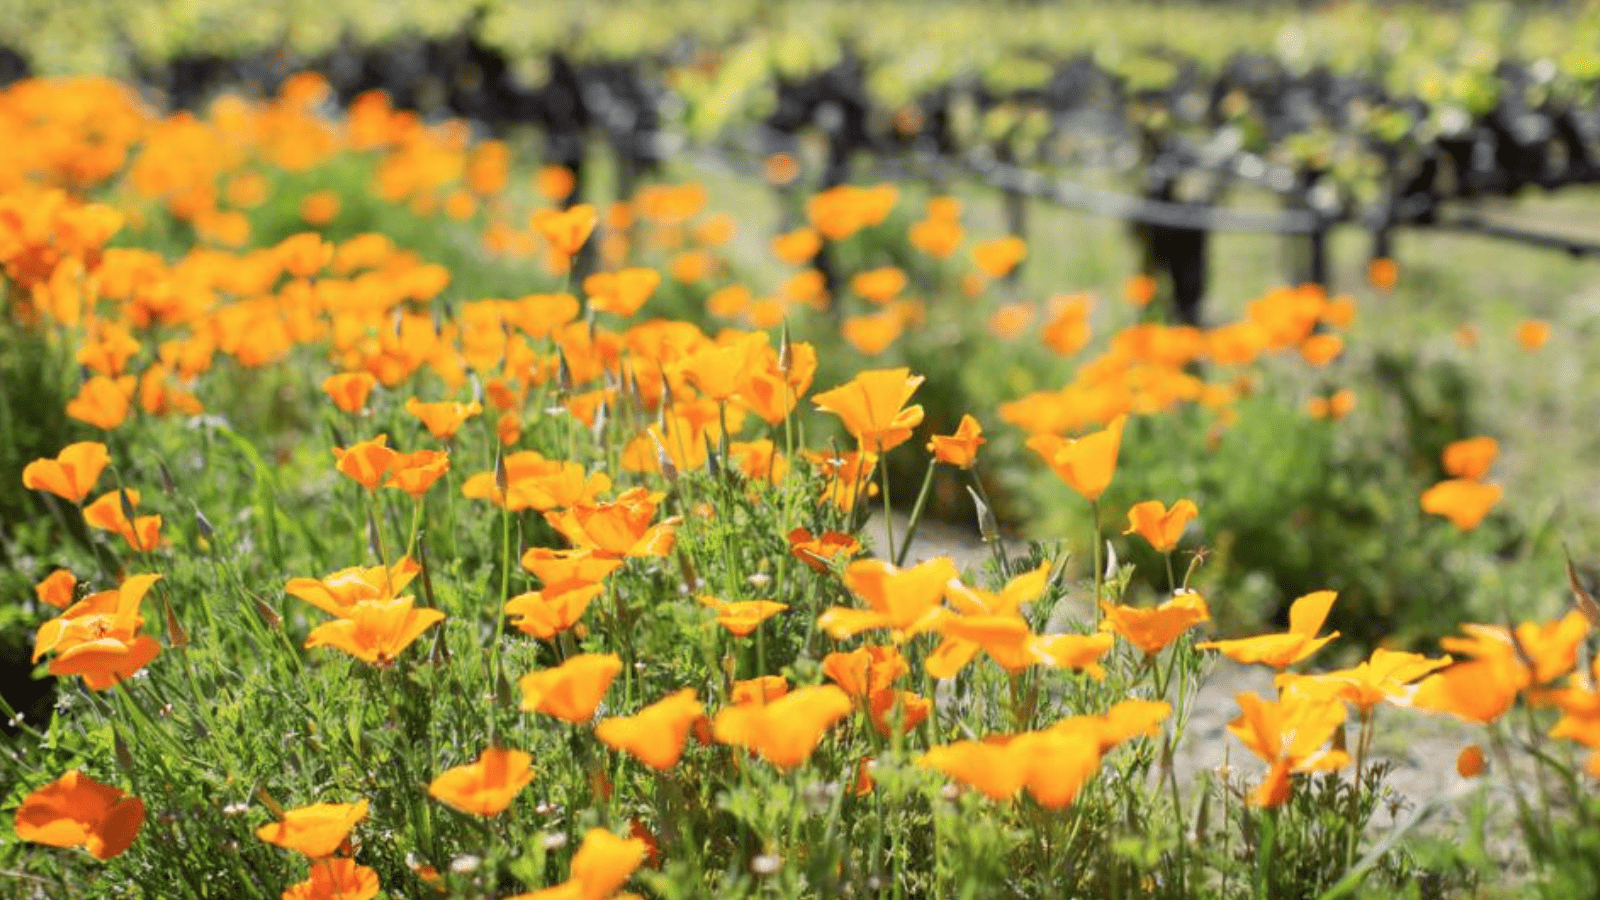 napa valley poppies_norcal wildflowers_800x450_visit napa valley